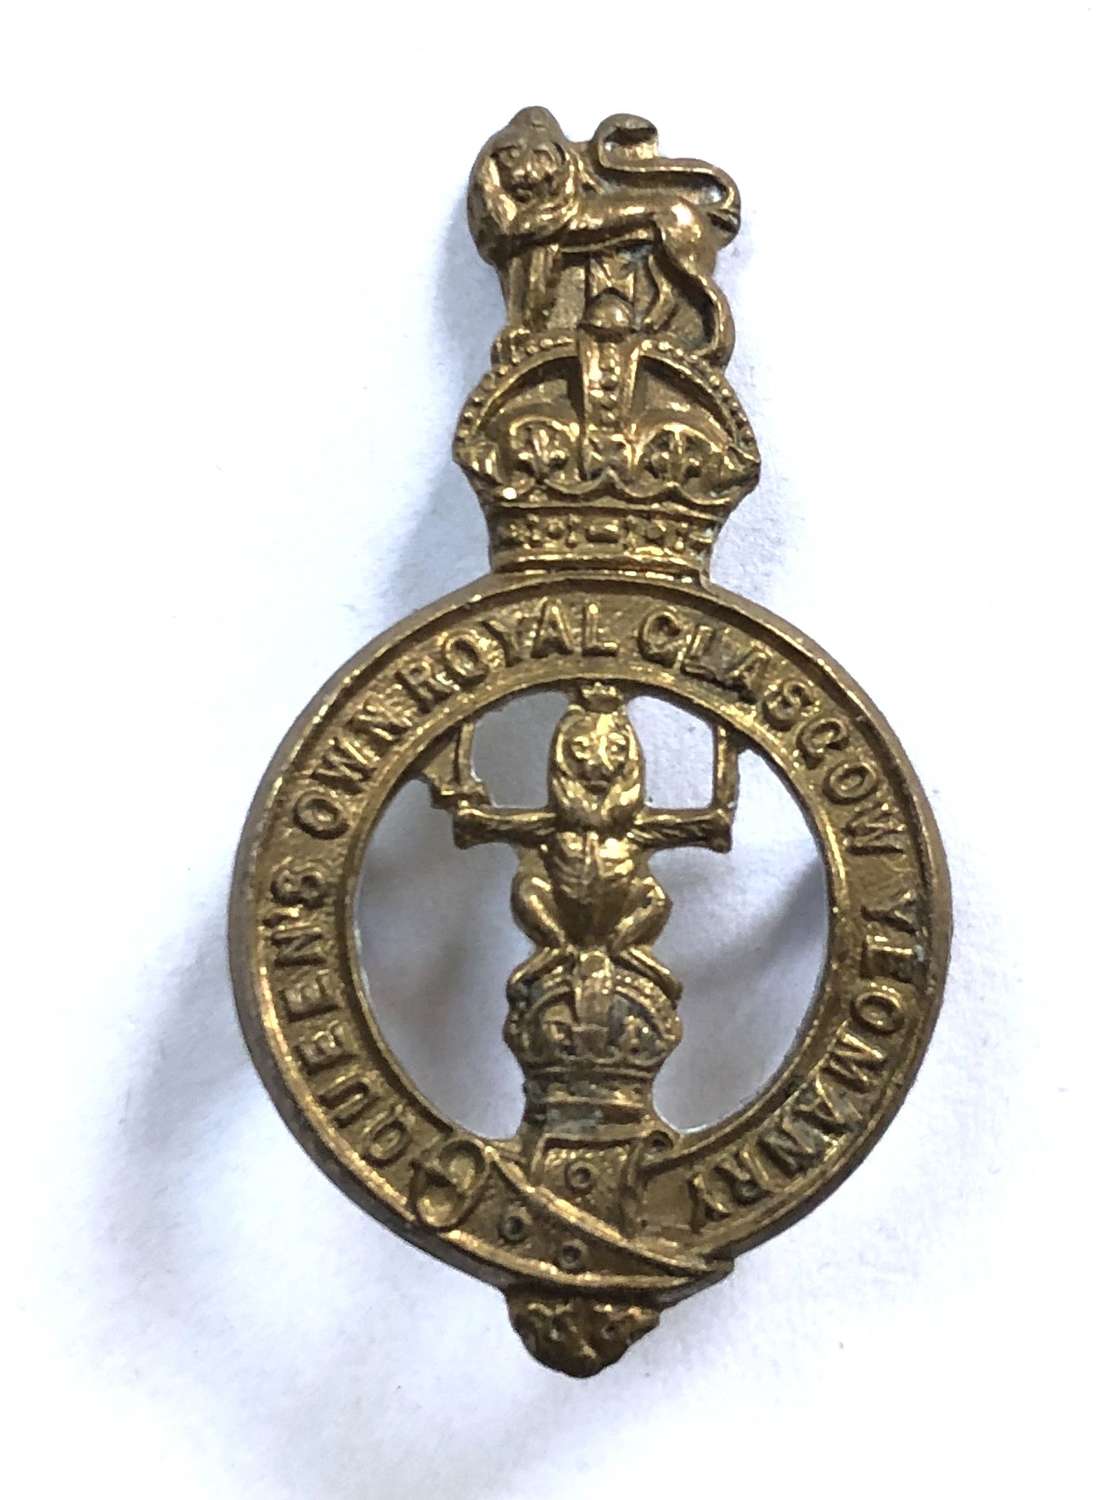 Queen’s Own Glasgow Yeomanry field service cap badge